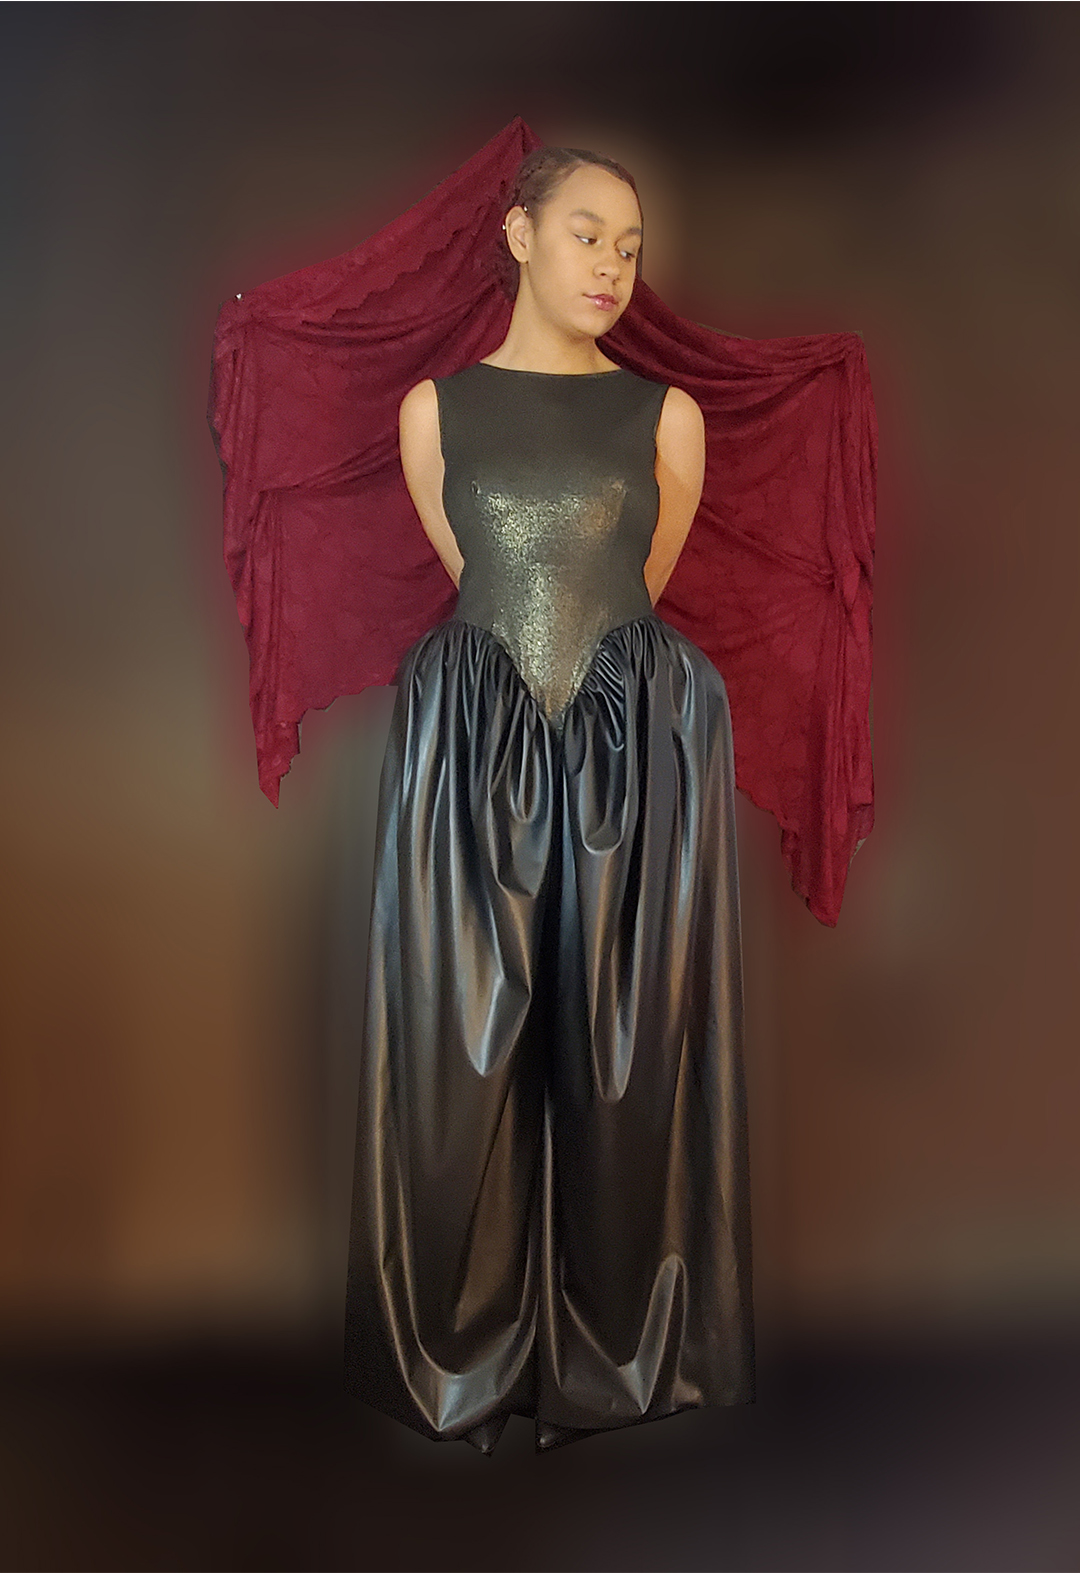 A model wearing a sleeveless jumpsuit that has a knit bodice and leather pants. The pants have gathering at the hips to resemble late 18th-century French dresses. The model is posed with her hands behind her back while looking down. The background is moody.